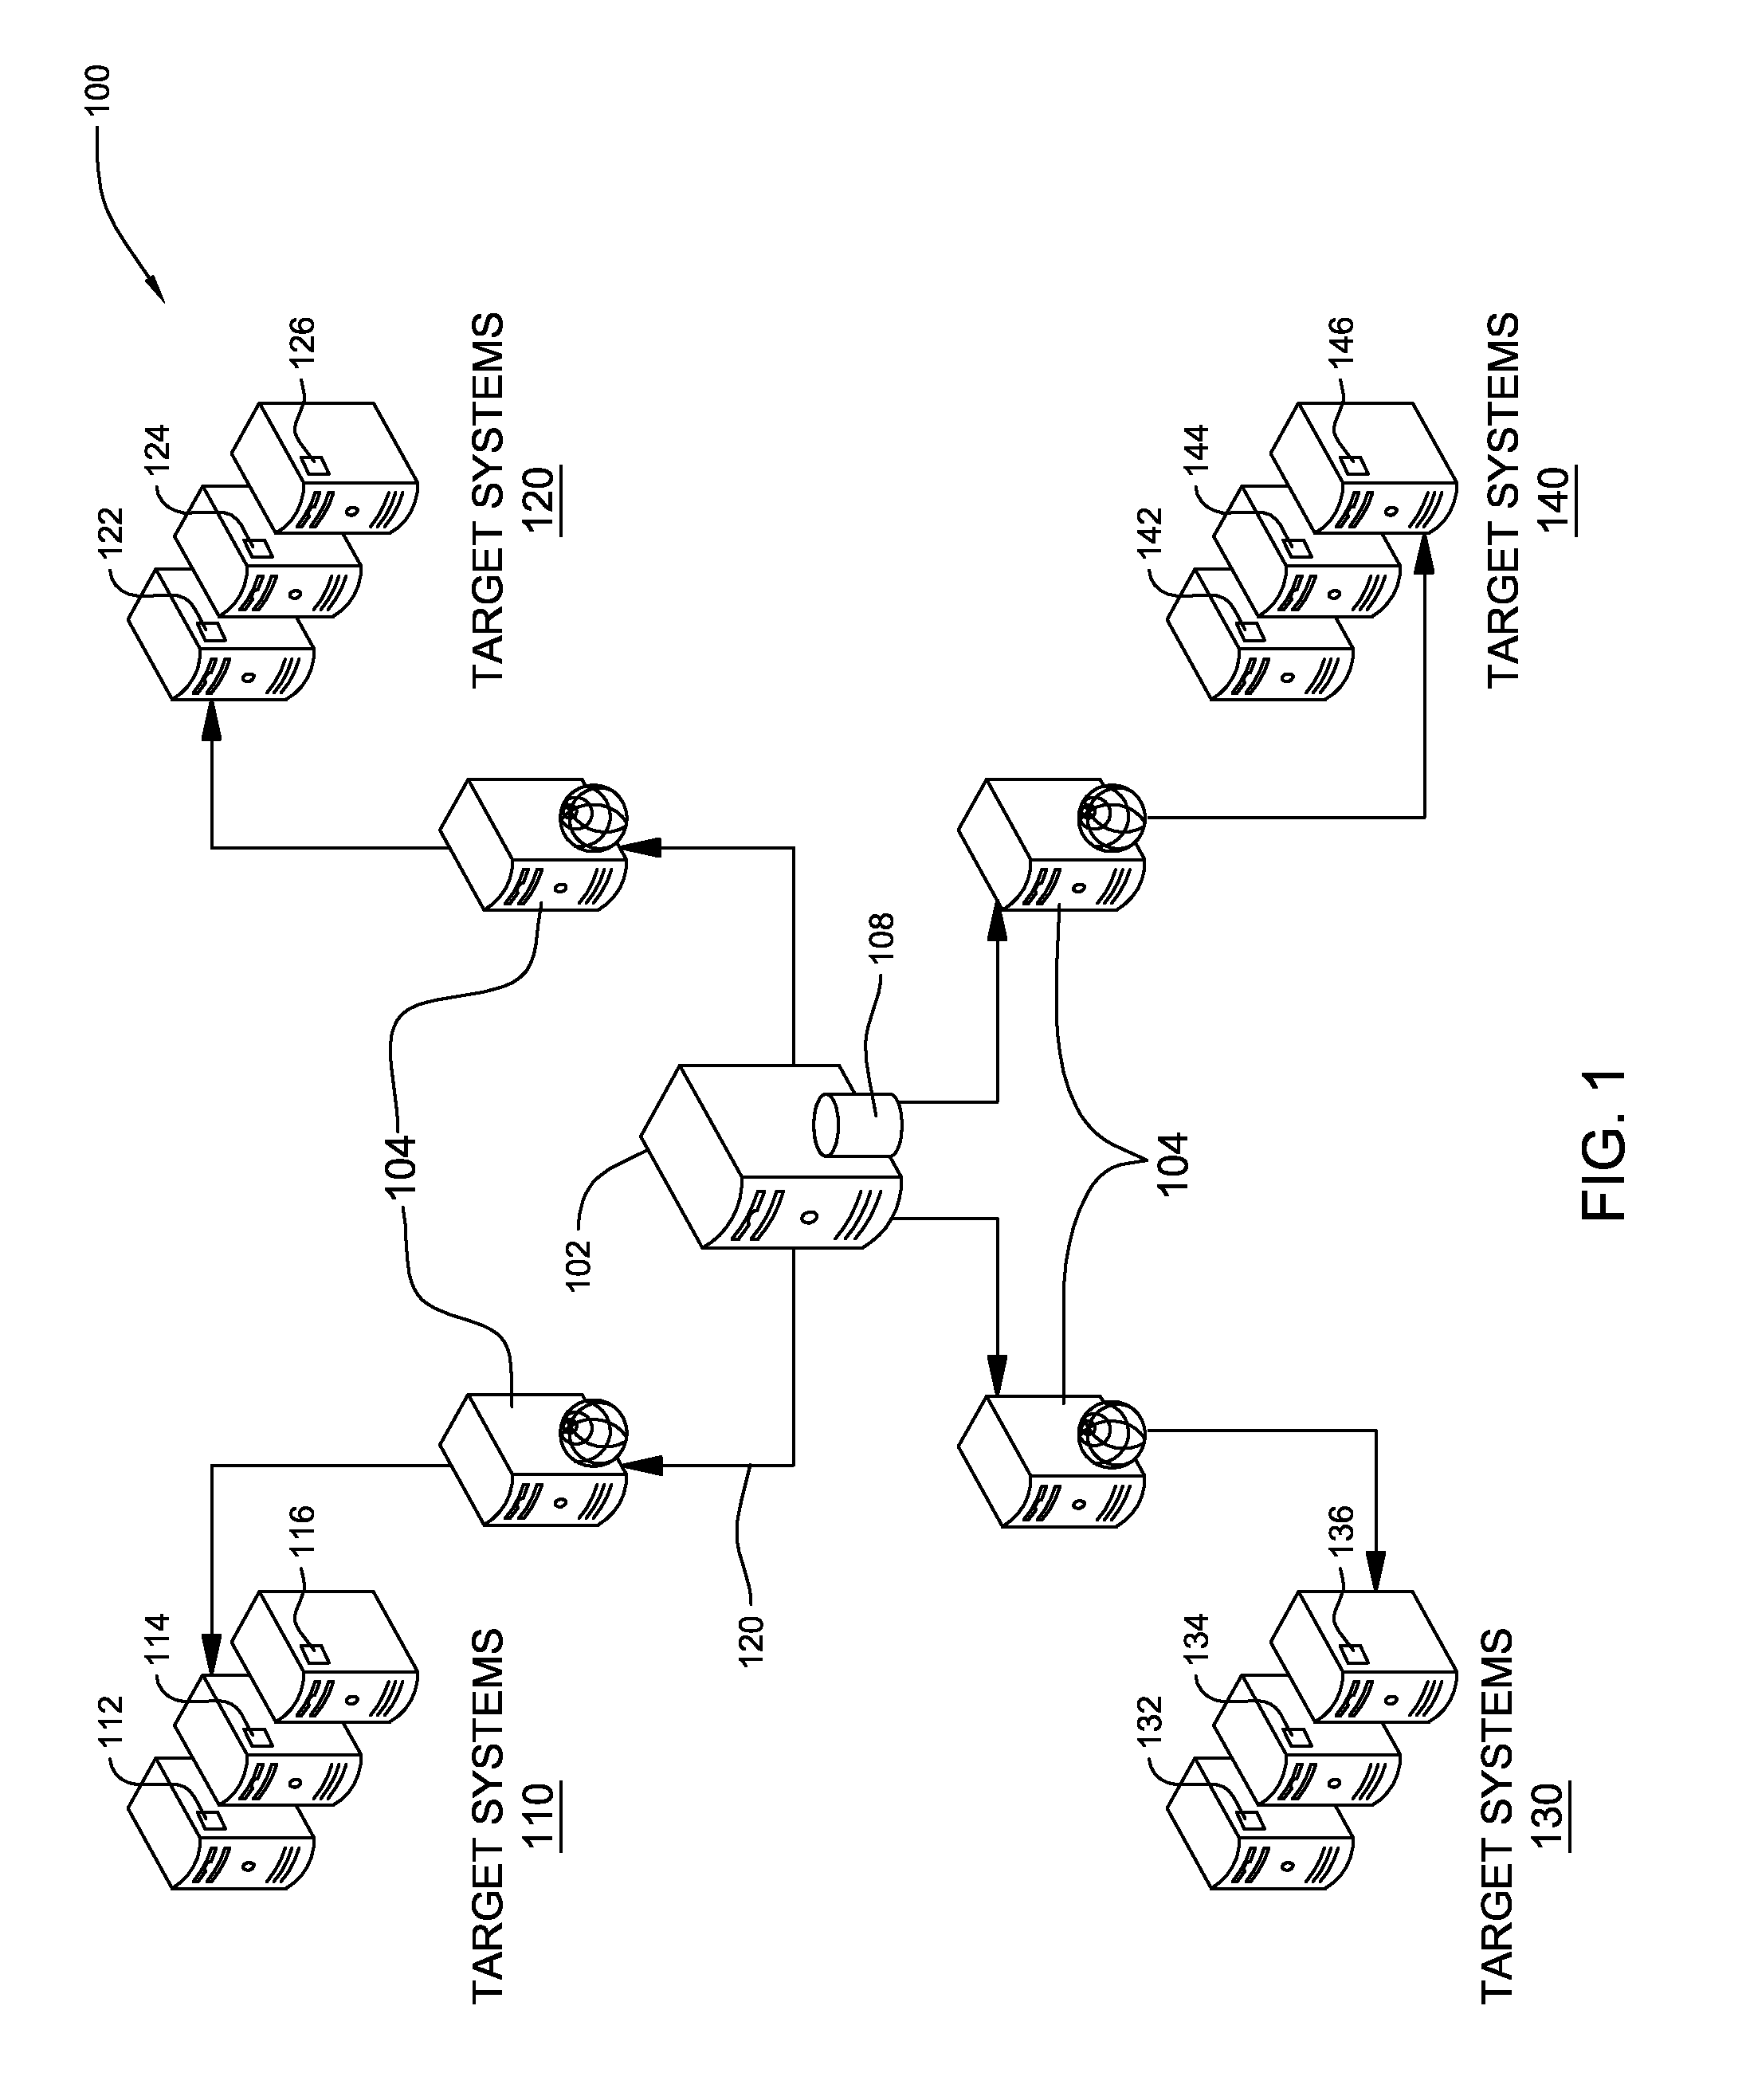 System, method and program product for dynamically performing an audit and security compliance validation in an operating environment